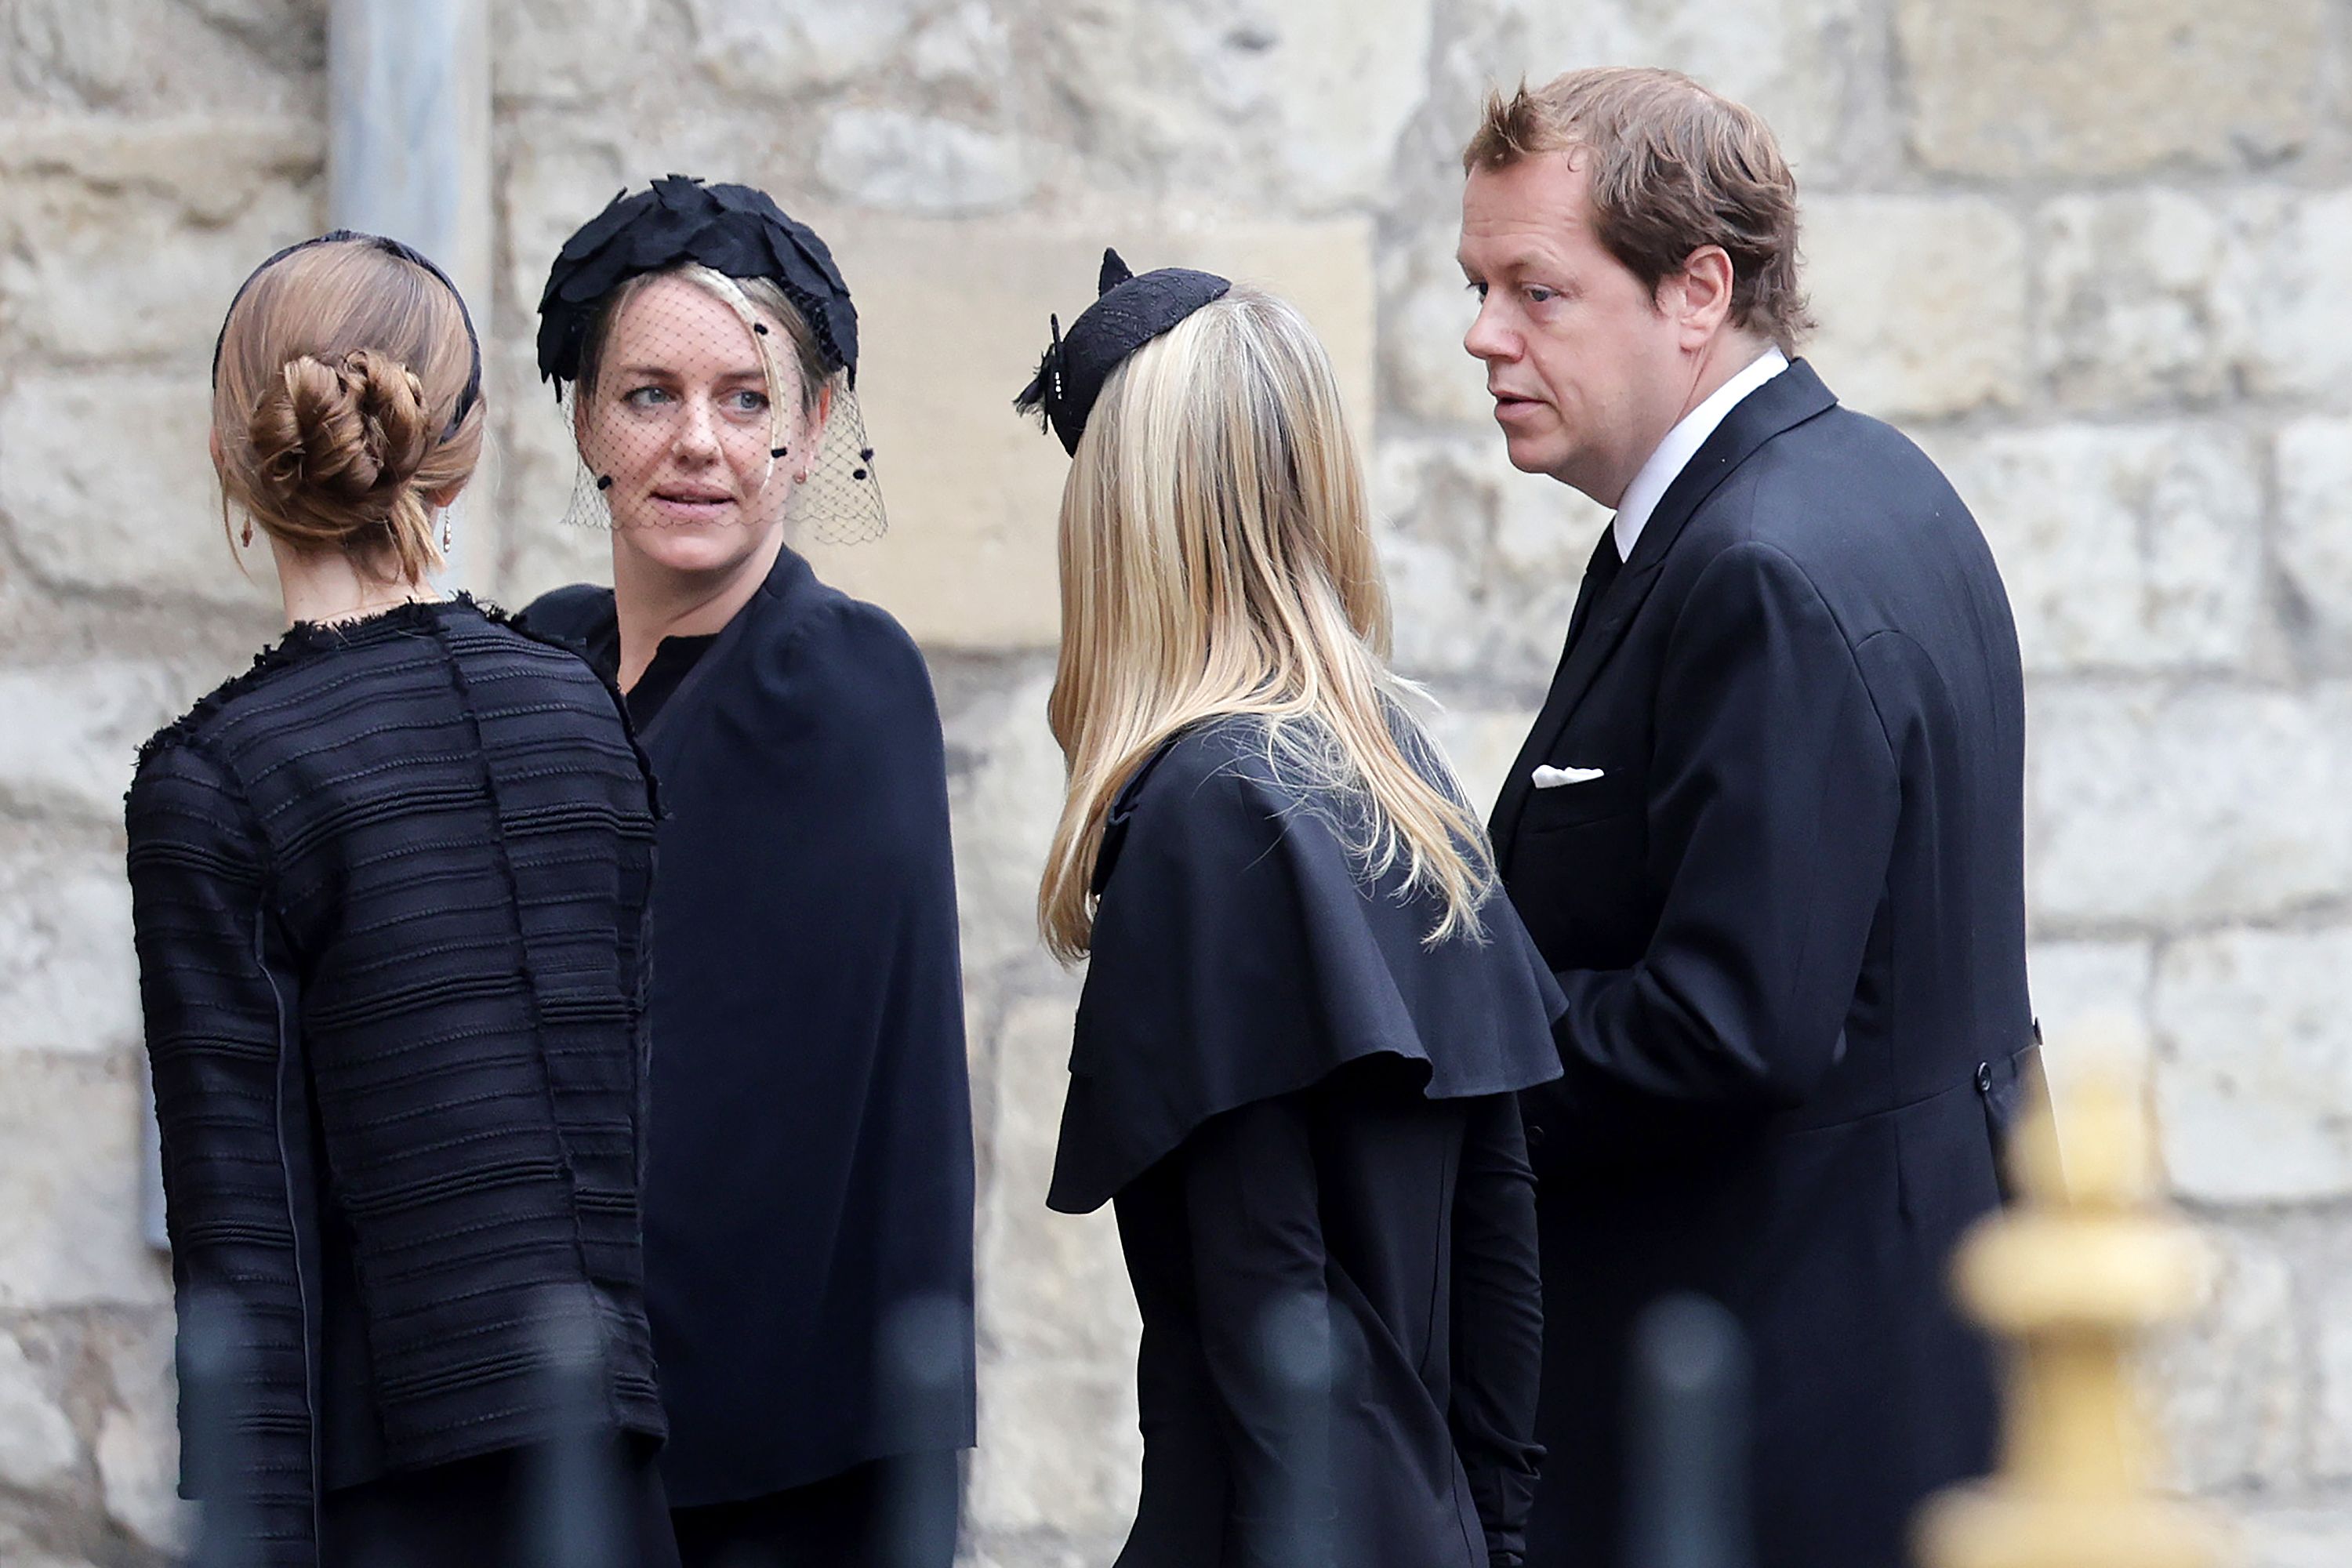 Meghan Markle Arrived at Queen's Funeral With Kate Middleton and Kids